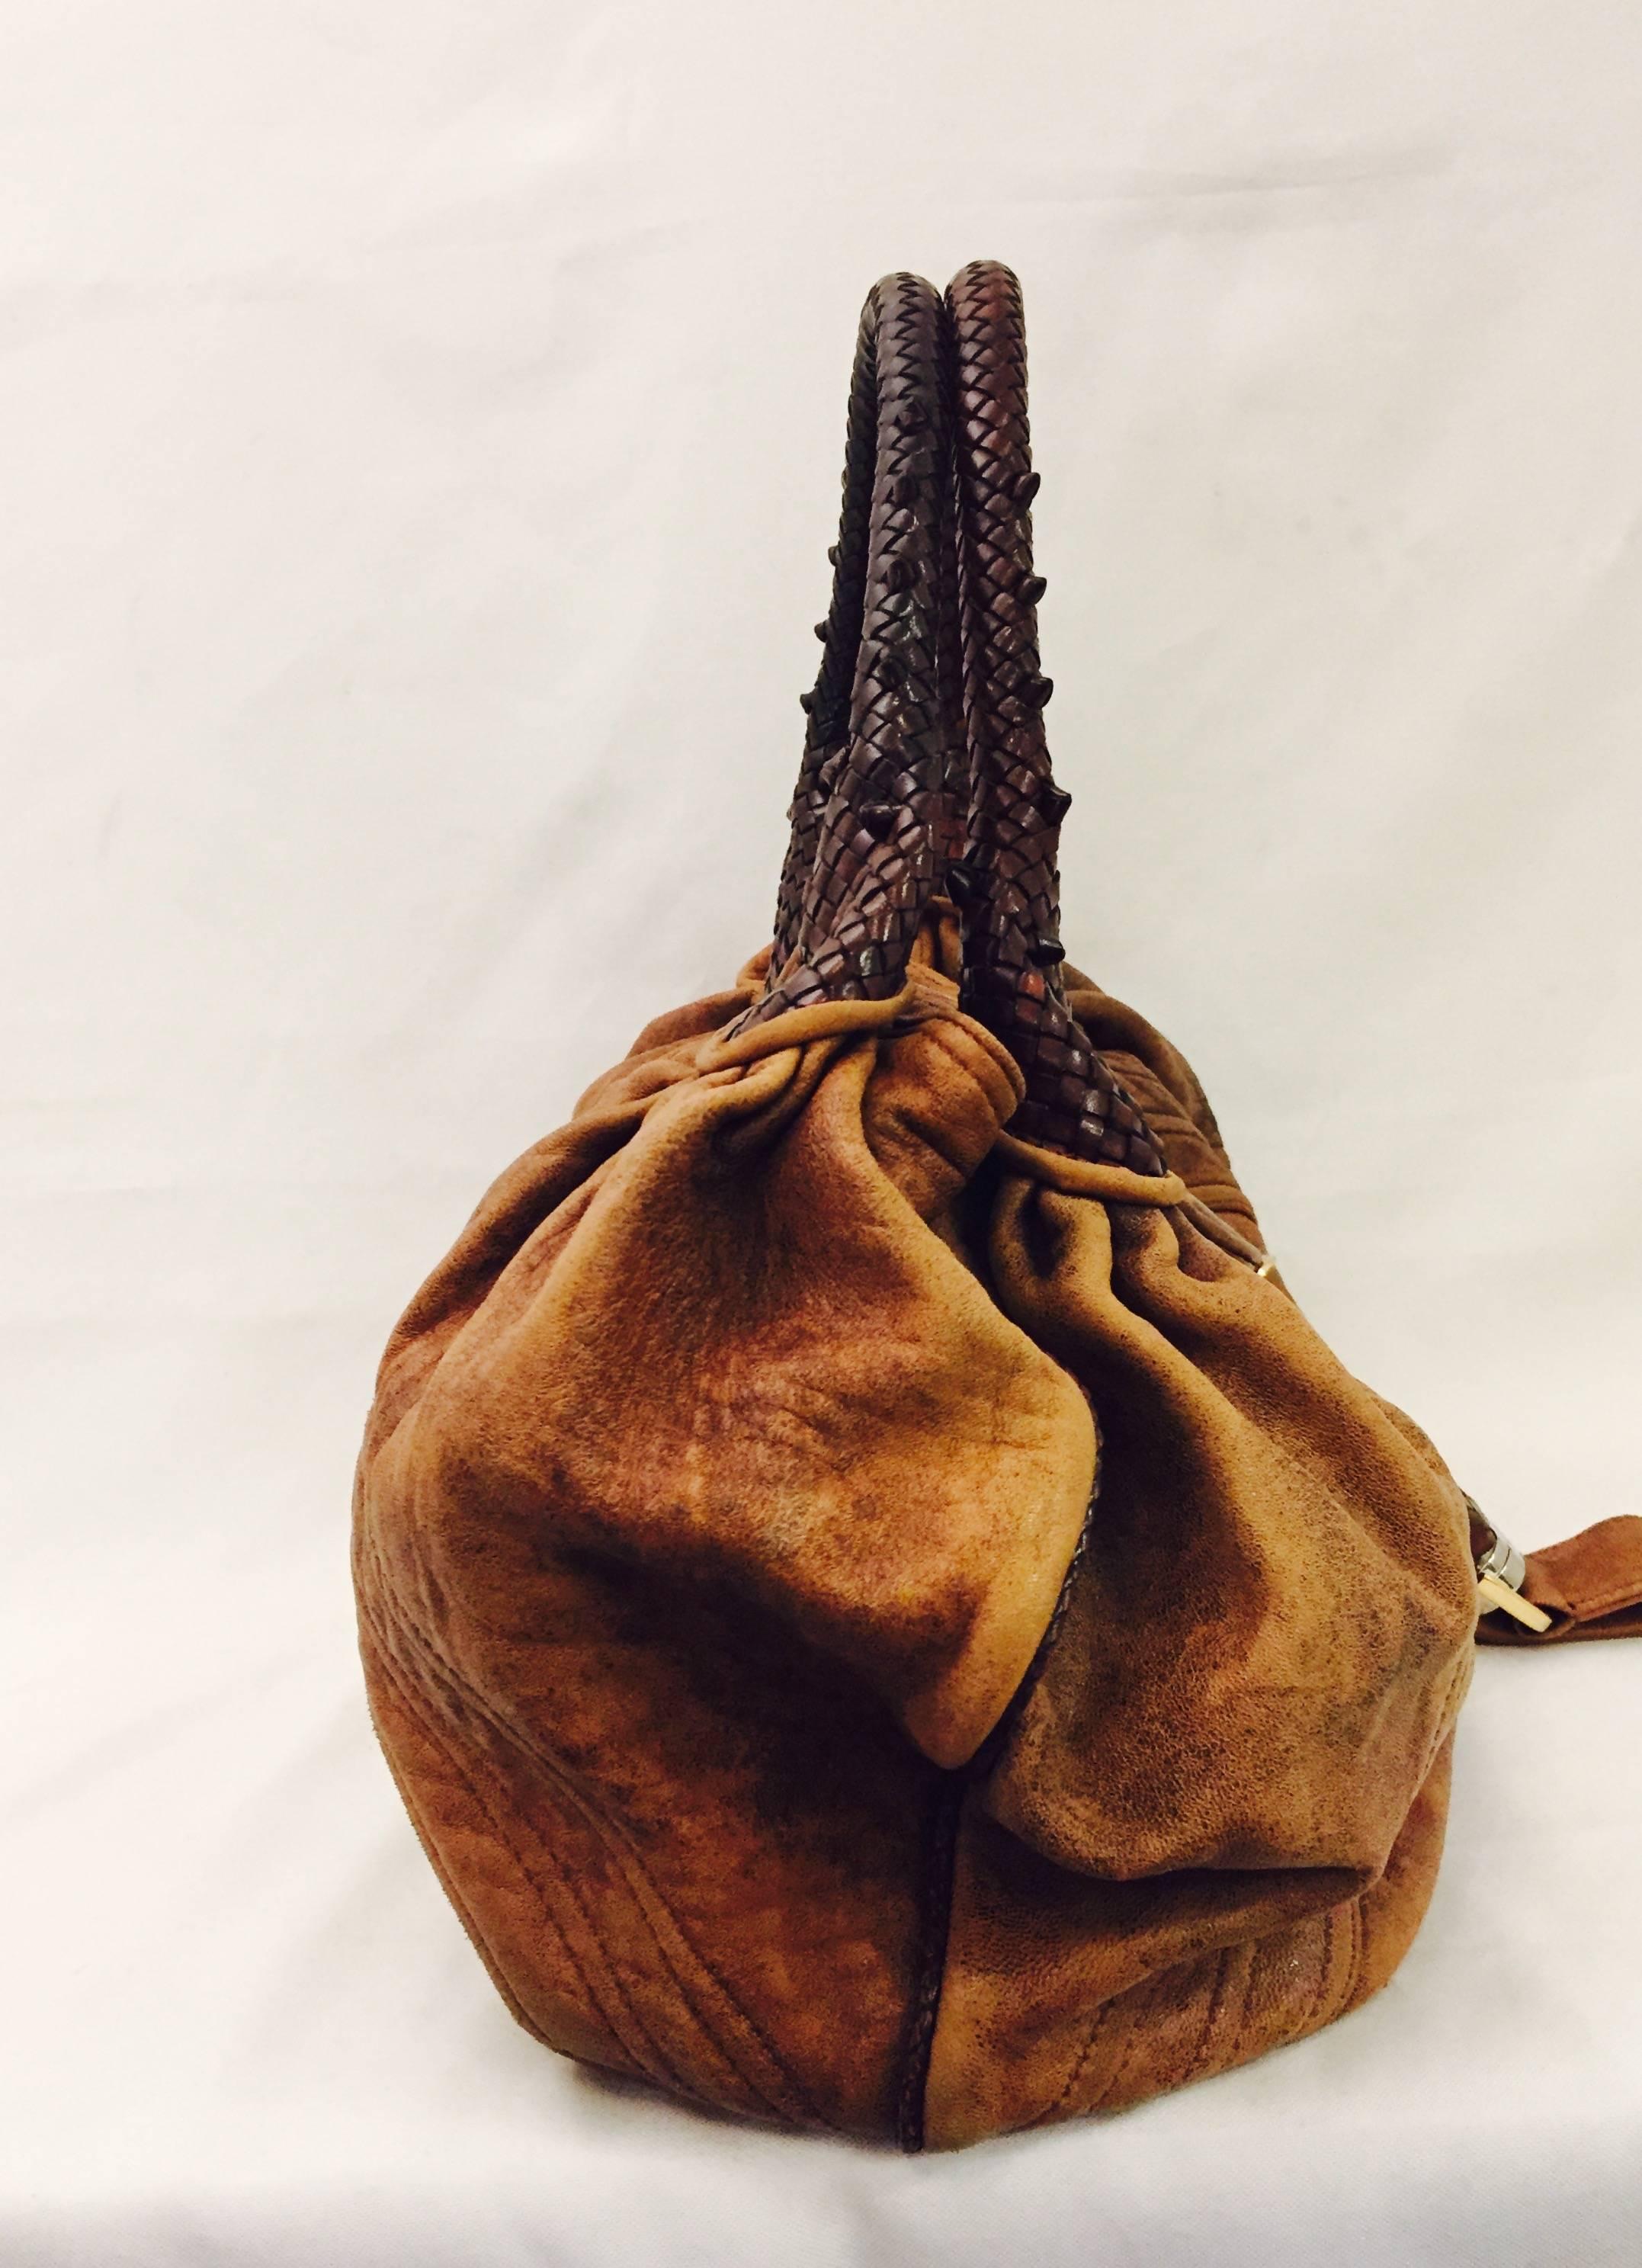 This authentic Fendi Spy Hobo Bag is iconic and timeless. With beautiful craftsmanship and incredible woven detail on the handles, this bag is a collectible. The dark brown woven top handles gives a true richness and luxury to this Spy Hobo handbag.